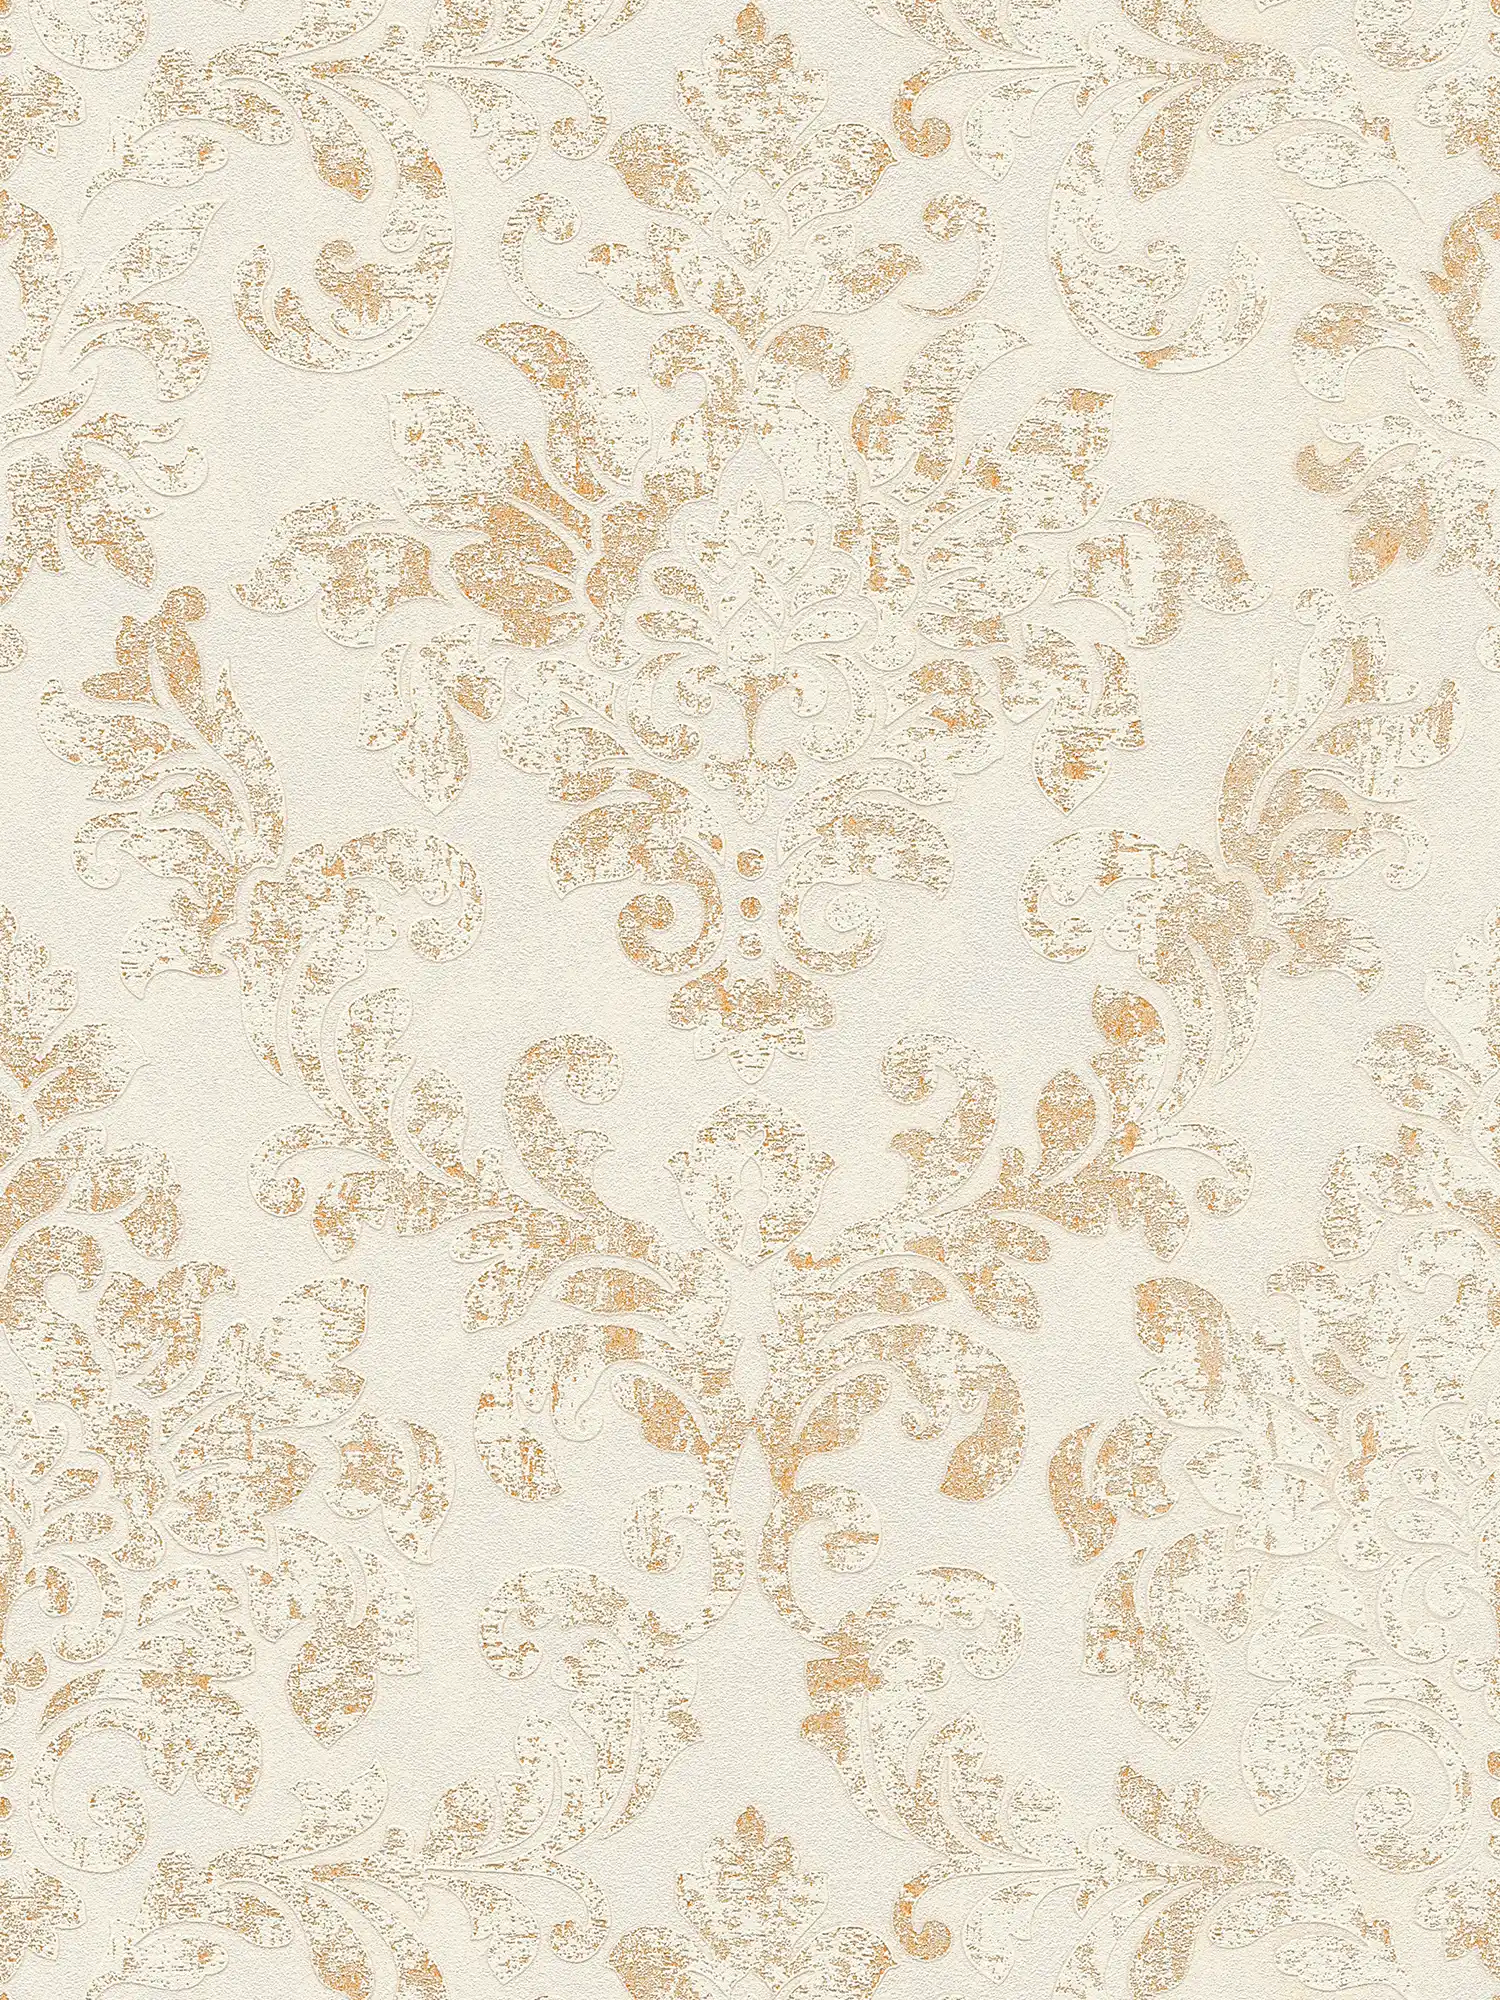 Baroque wallpaper with ornaments in vintage style - beige, gold, brown
